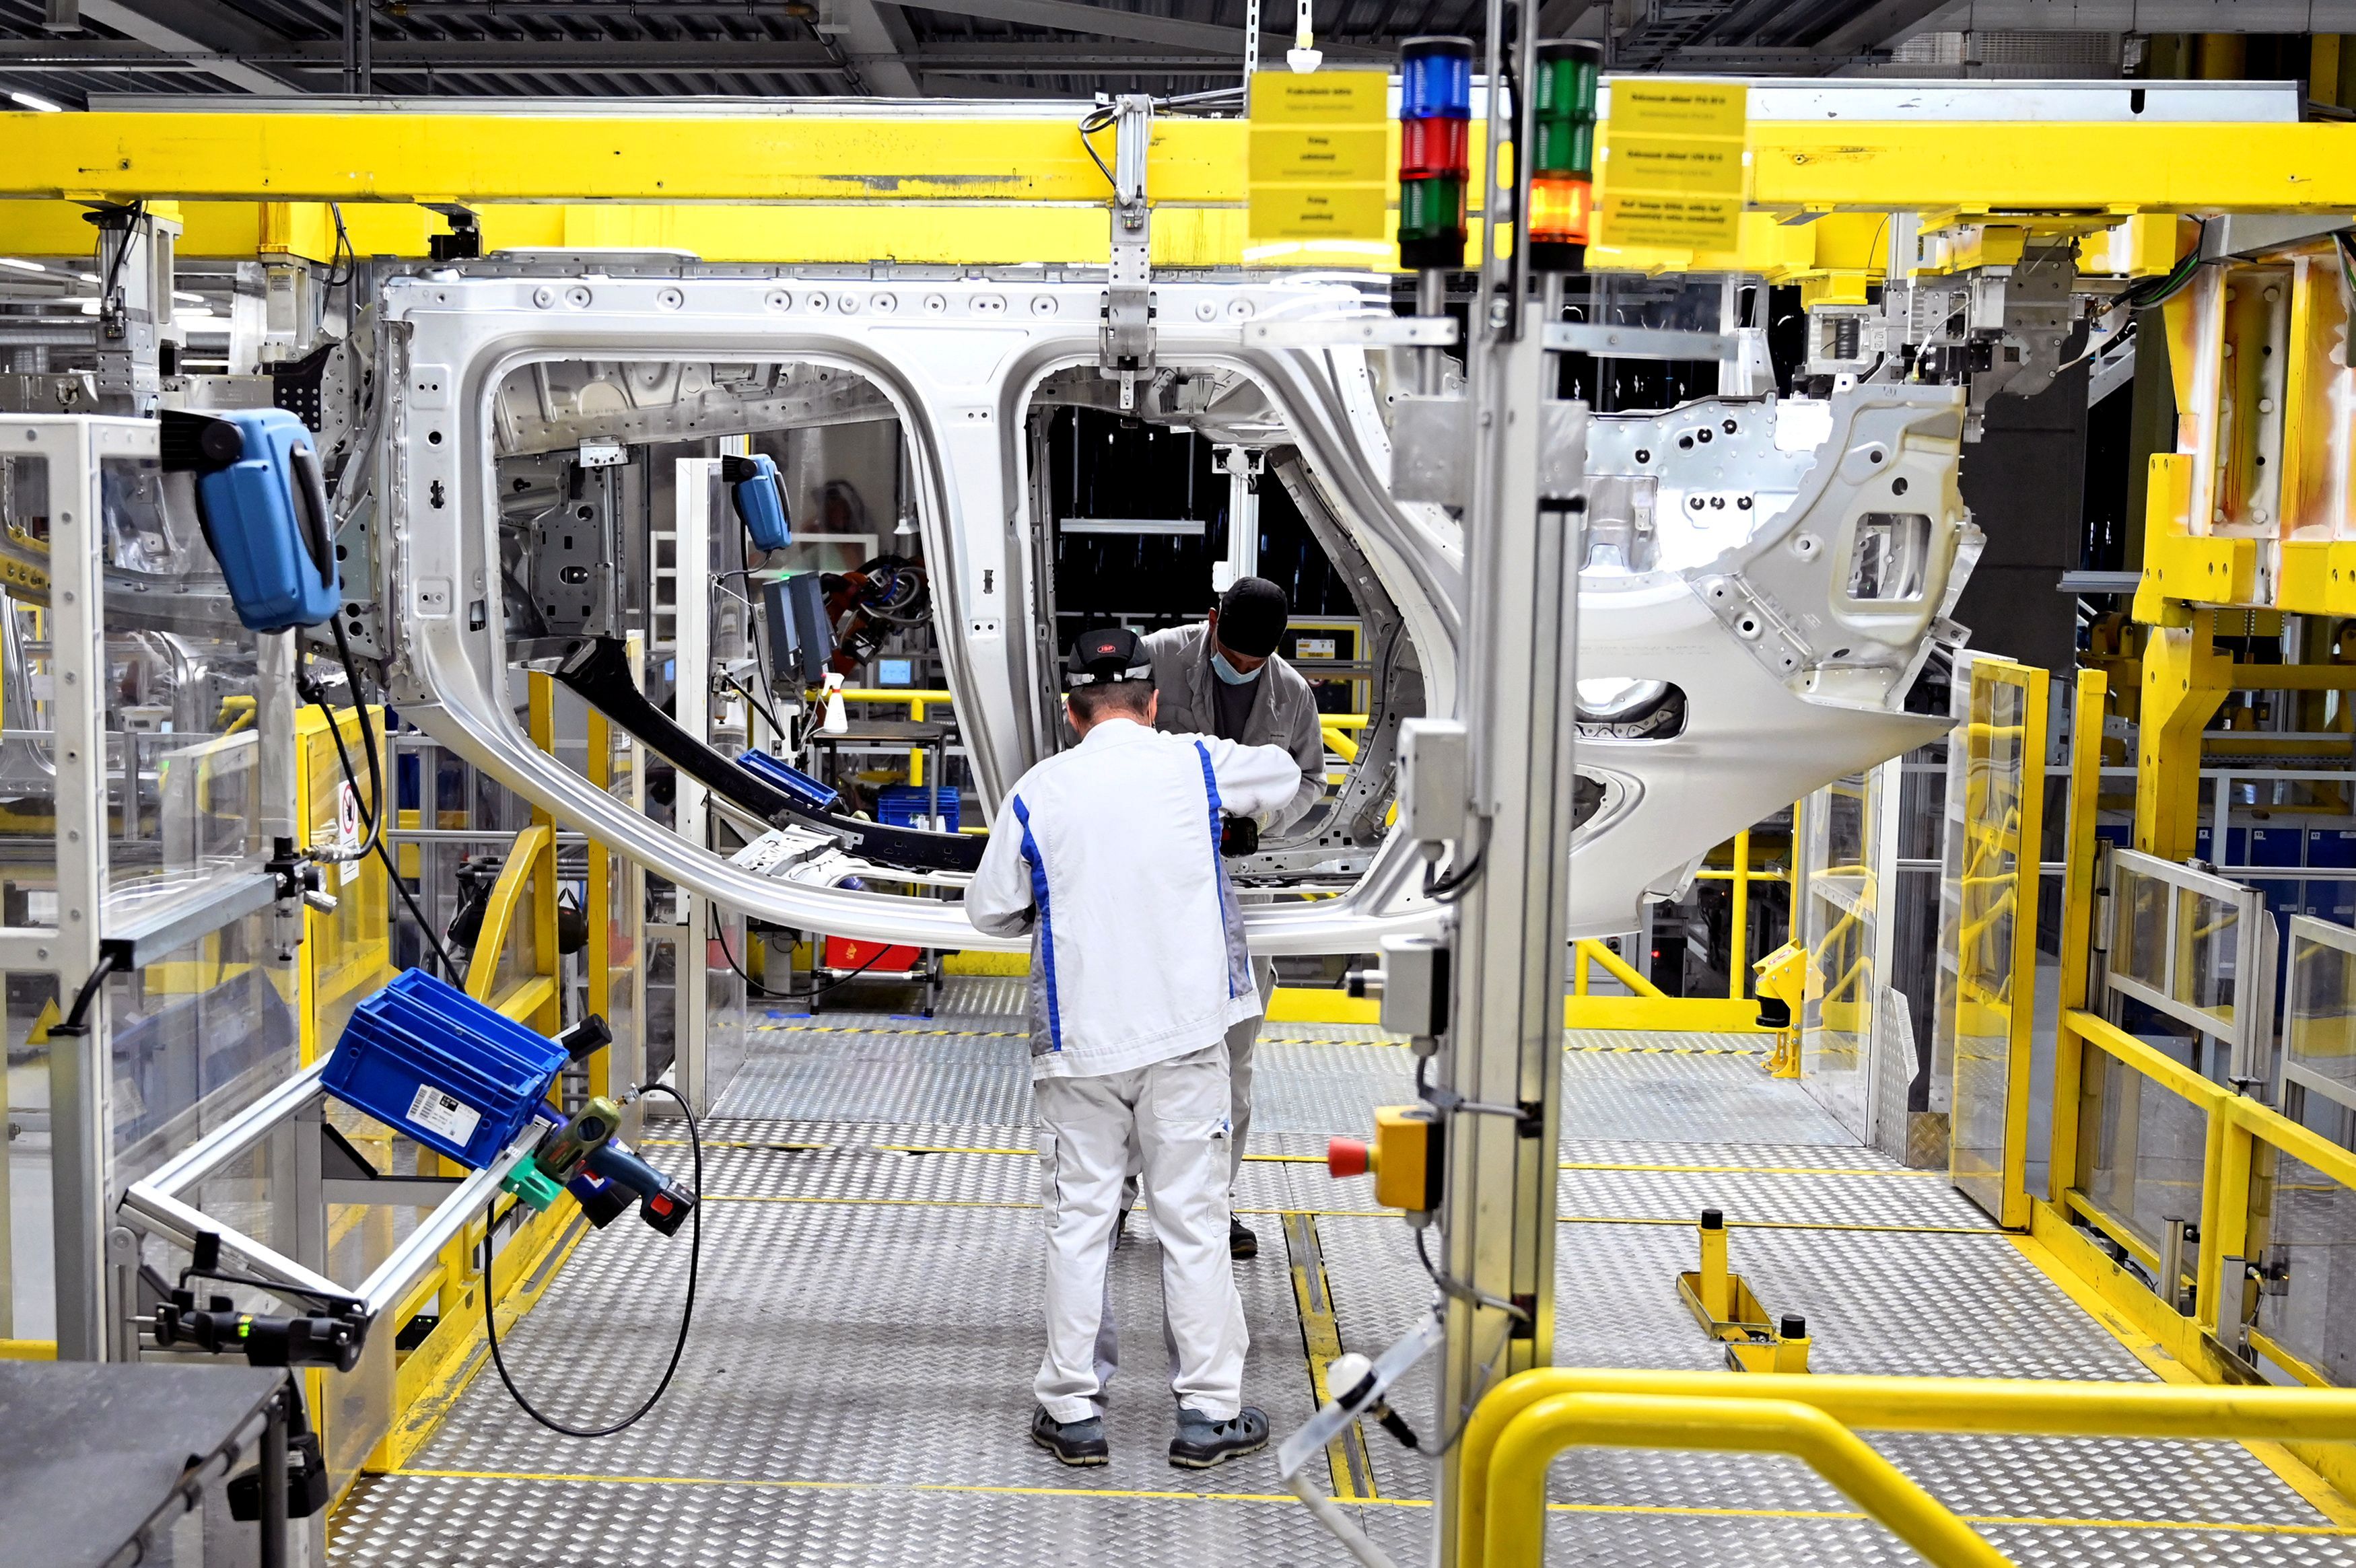 FILE PHOTO: Employees work on an assembly line as the Volkswagen construction plant reopens after closing down last month due to the coronavirus disease (COVID-19) outbreak in Bratislava